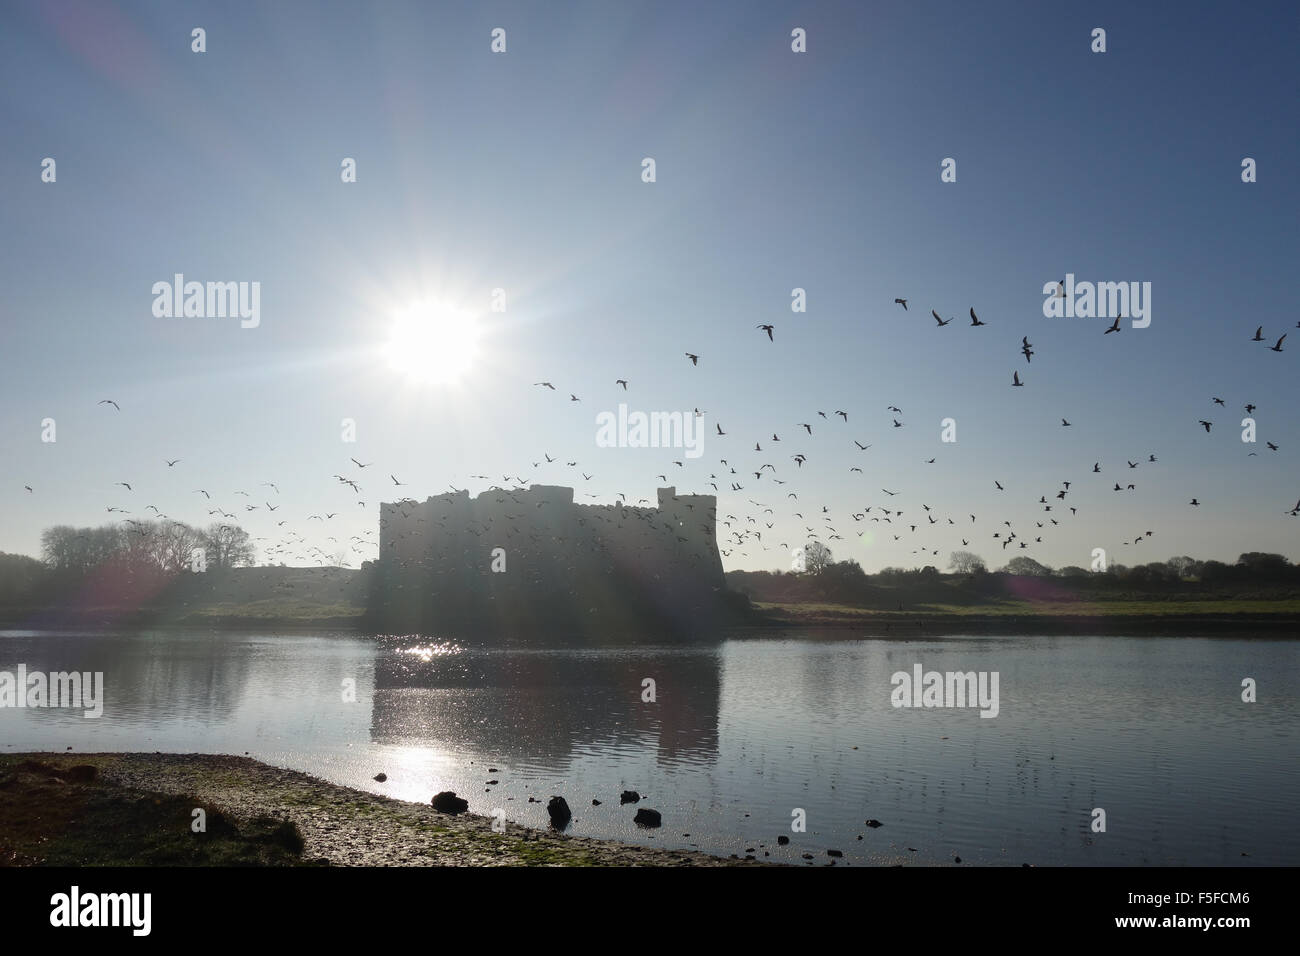 A flock of birds takes flight in front of Carew Castle, Carew, Pembrokeshire Stock Photo